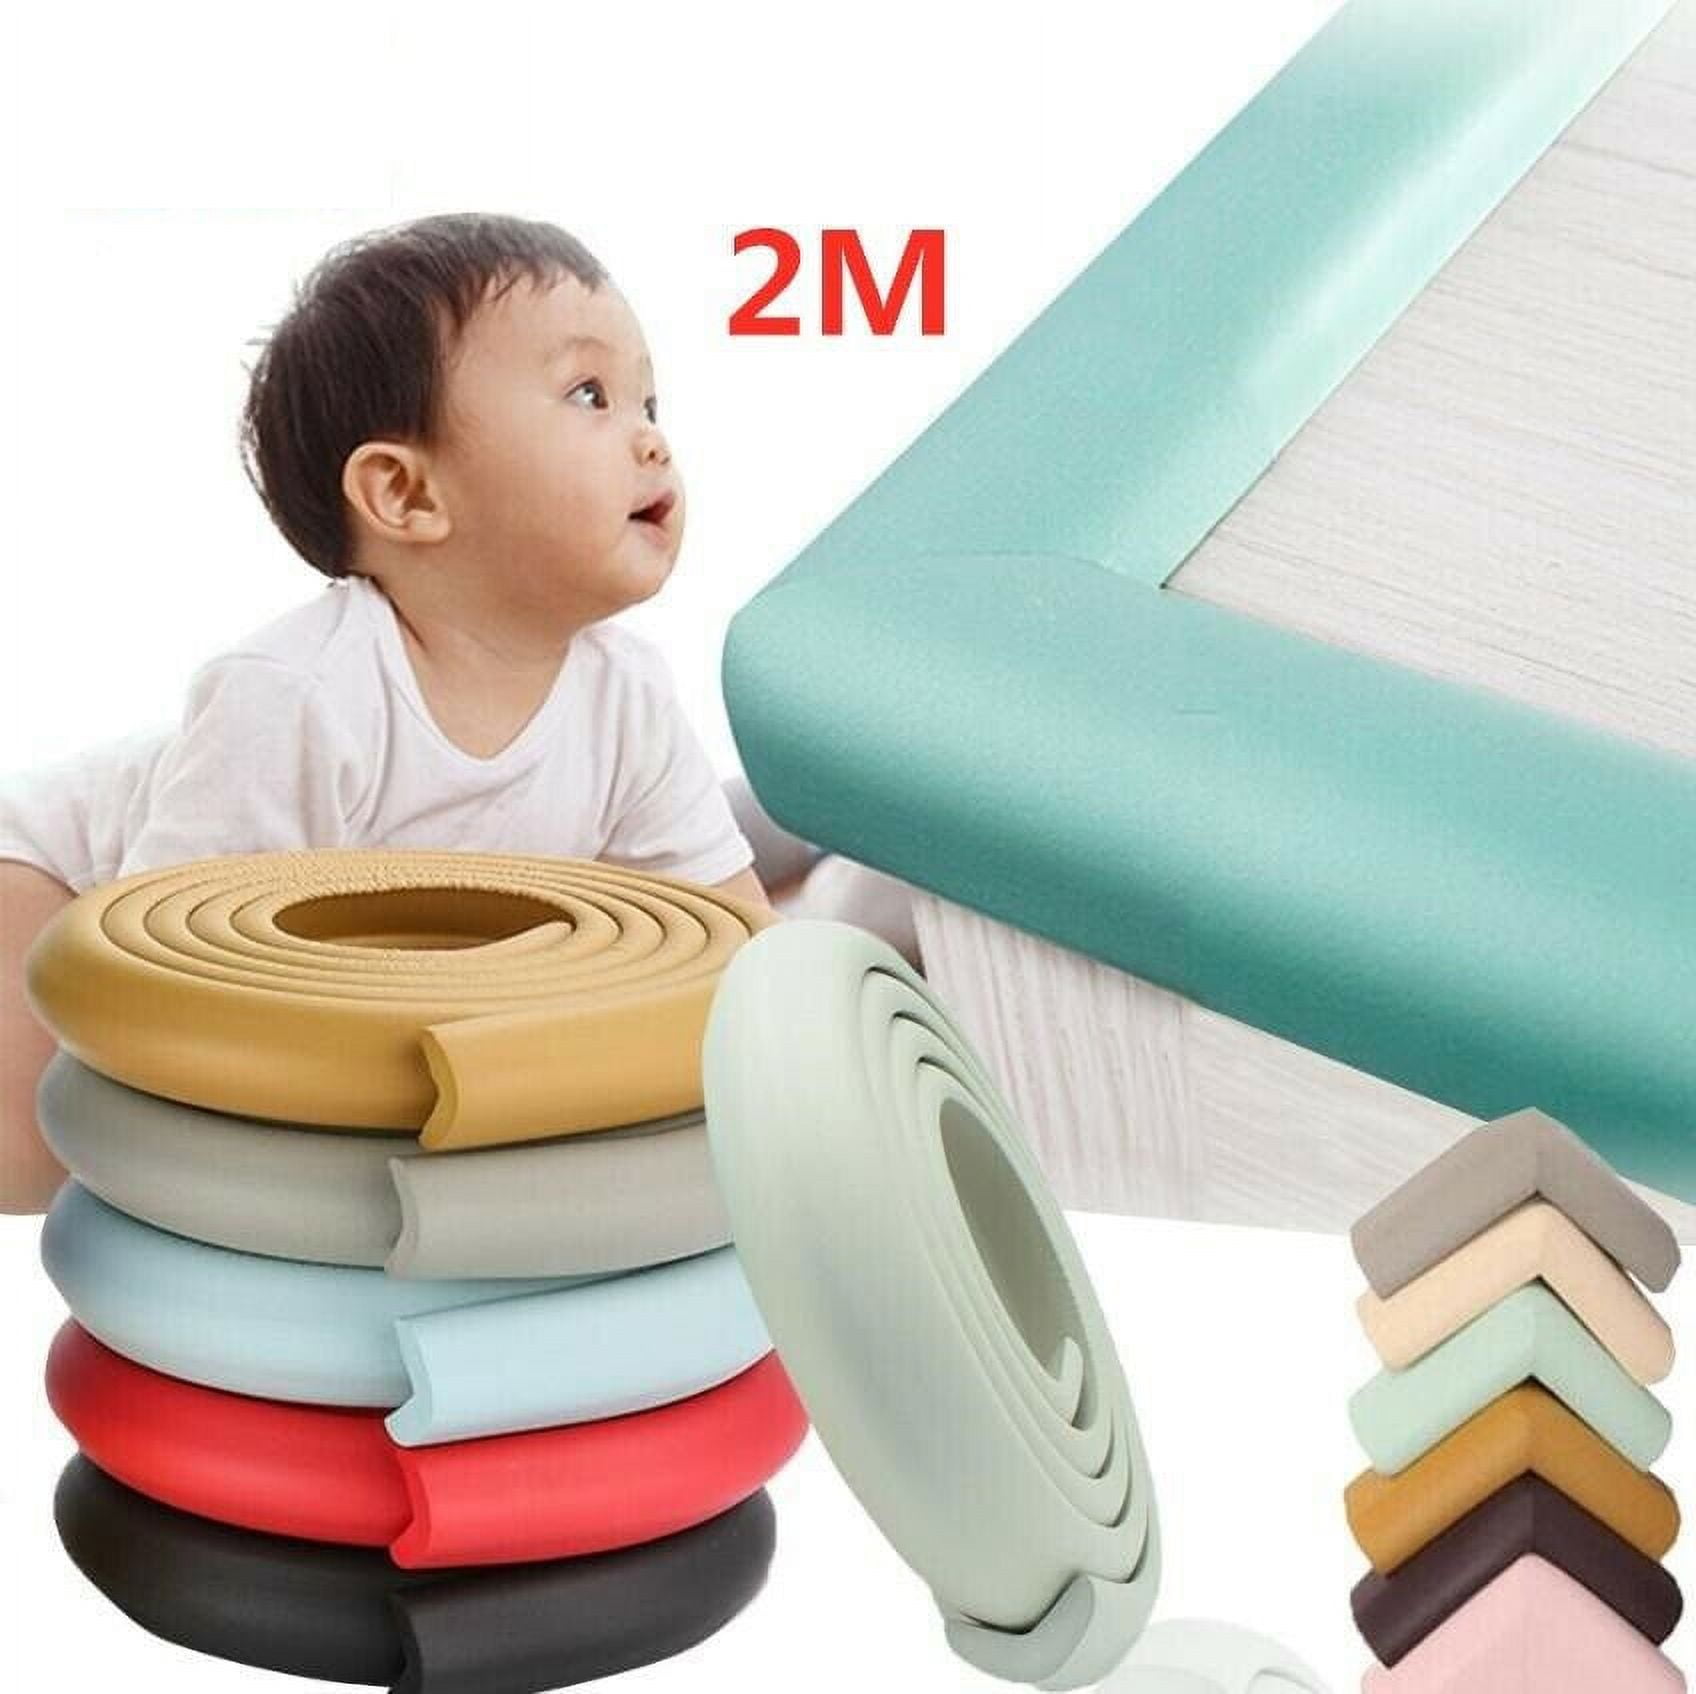 YHDSN 6.5 ft L Shape Baby Proofing Edge Guards Safety Extra Thick Soft Strip Foam Bumper Cushion Protectors for Furniture Desk Table Step Fireplace